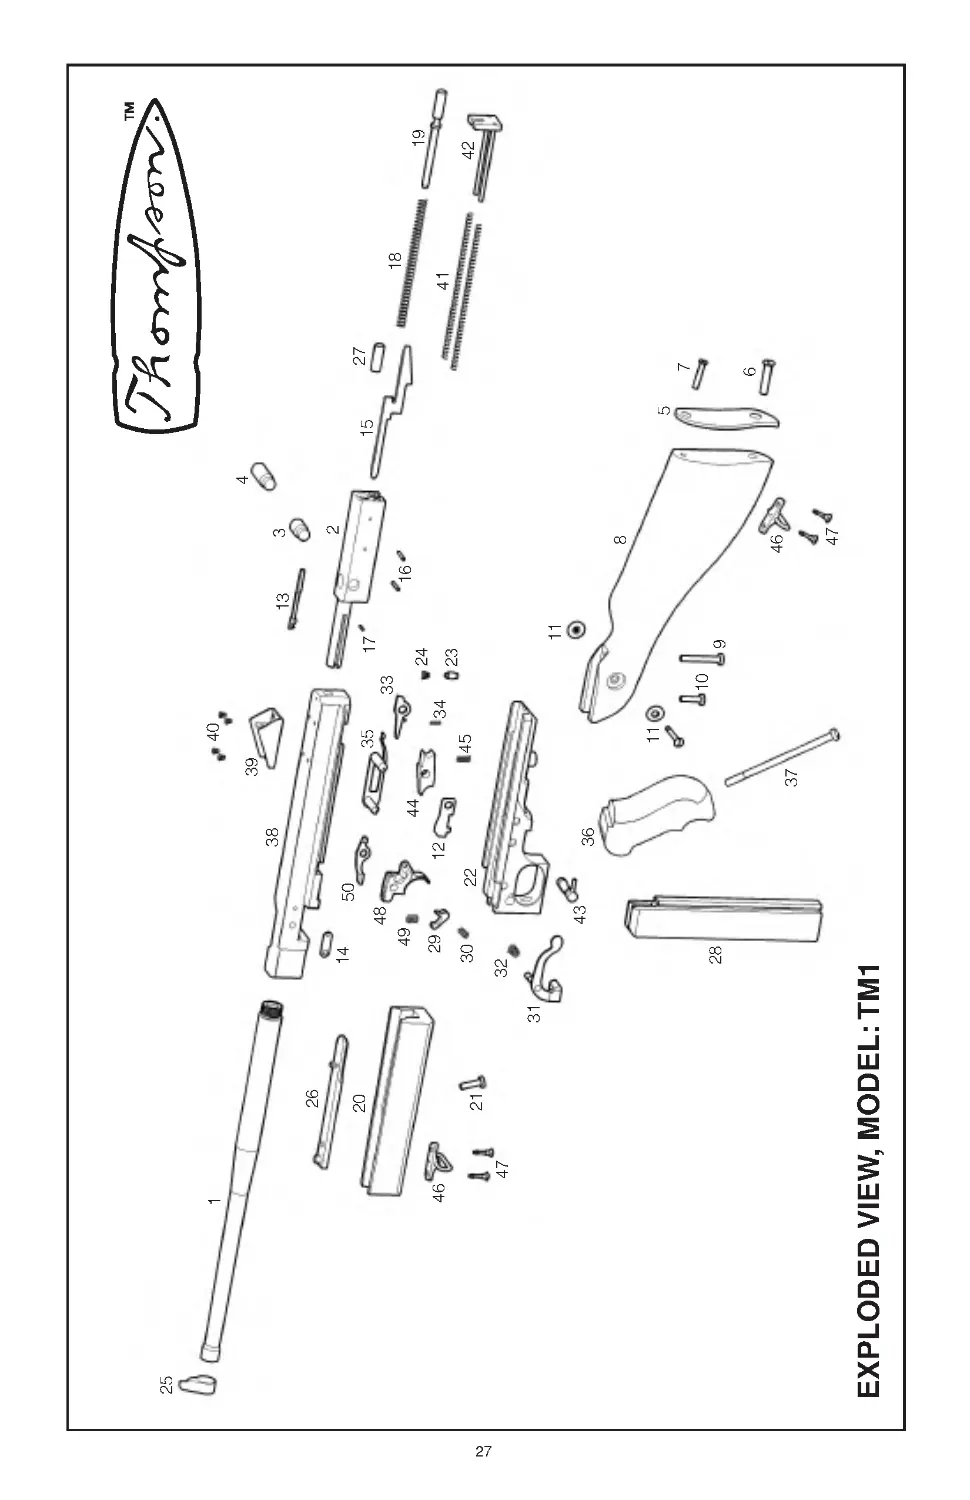 Models: TM1 Exploded View